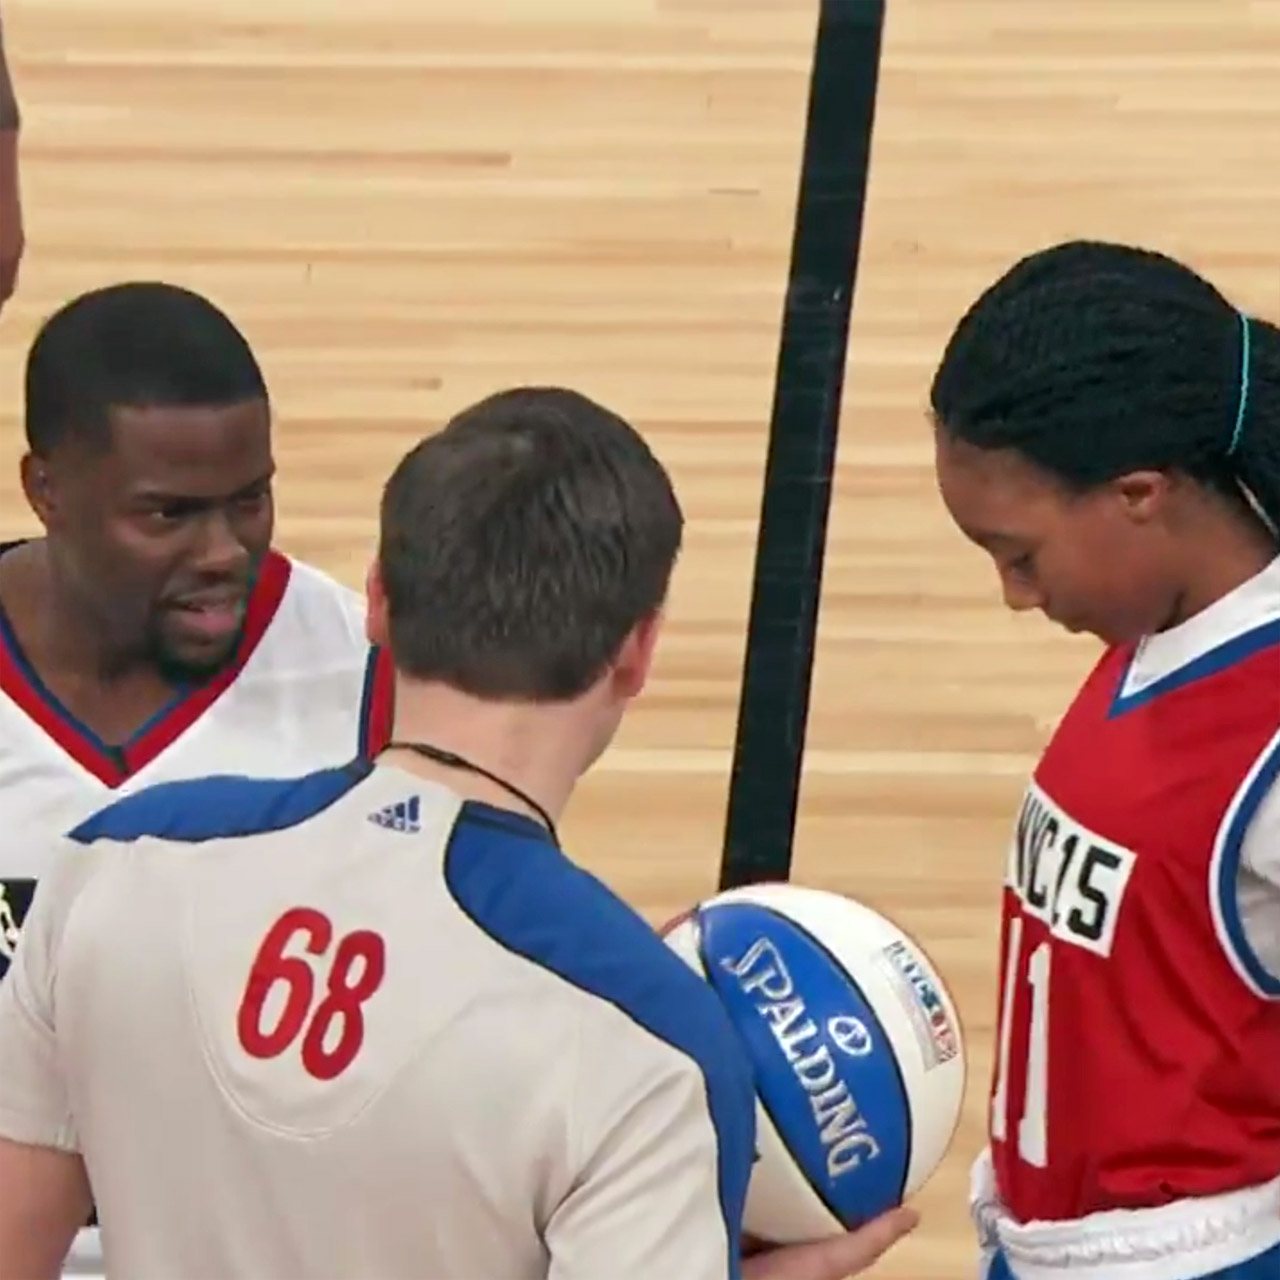 Mo'ne Davis faces off against Kevin Hart in the NBA All-Star Celebrity Game